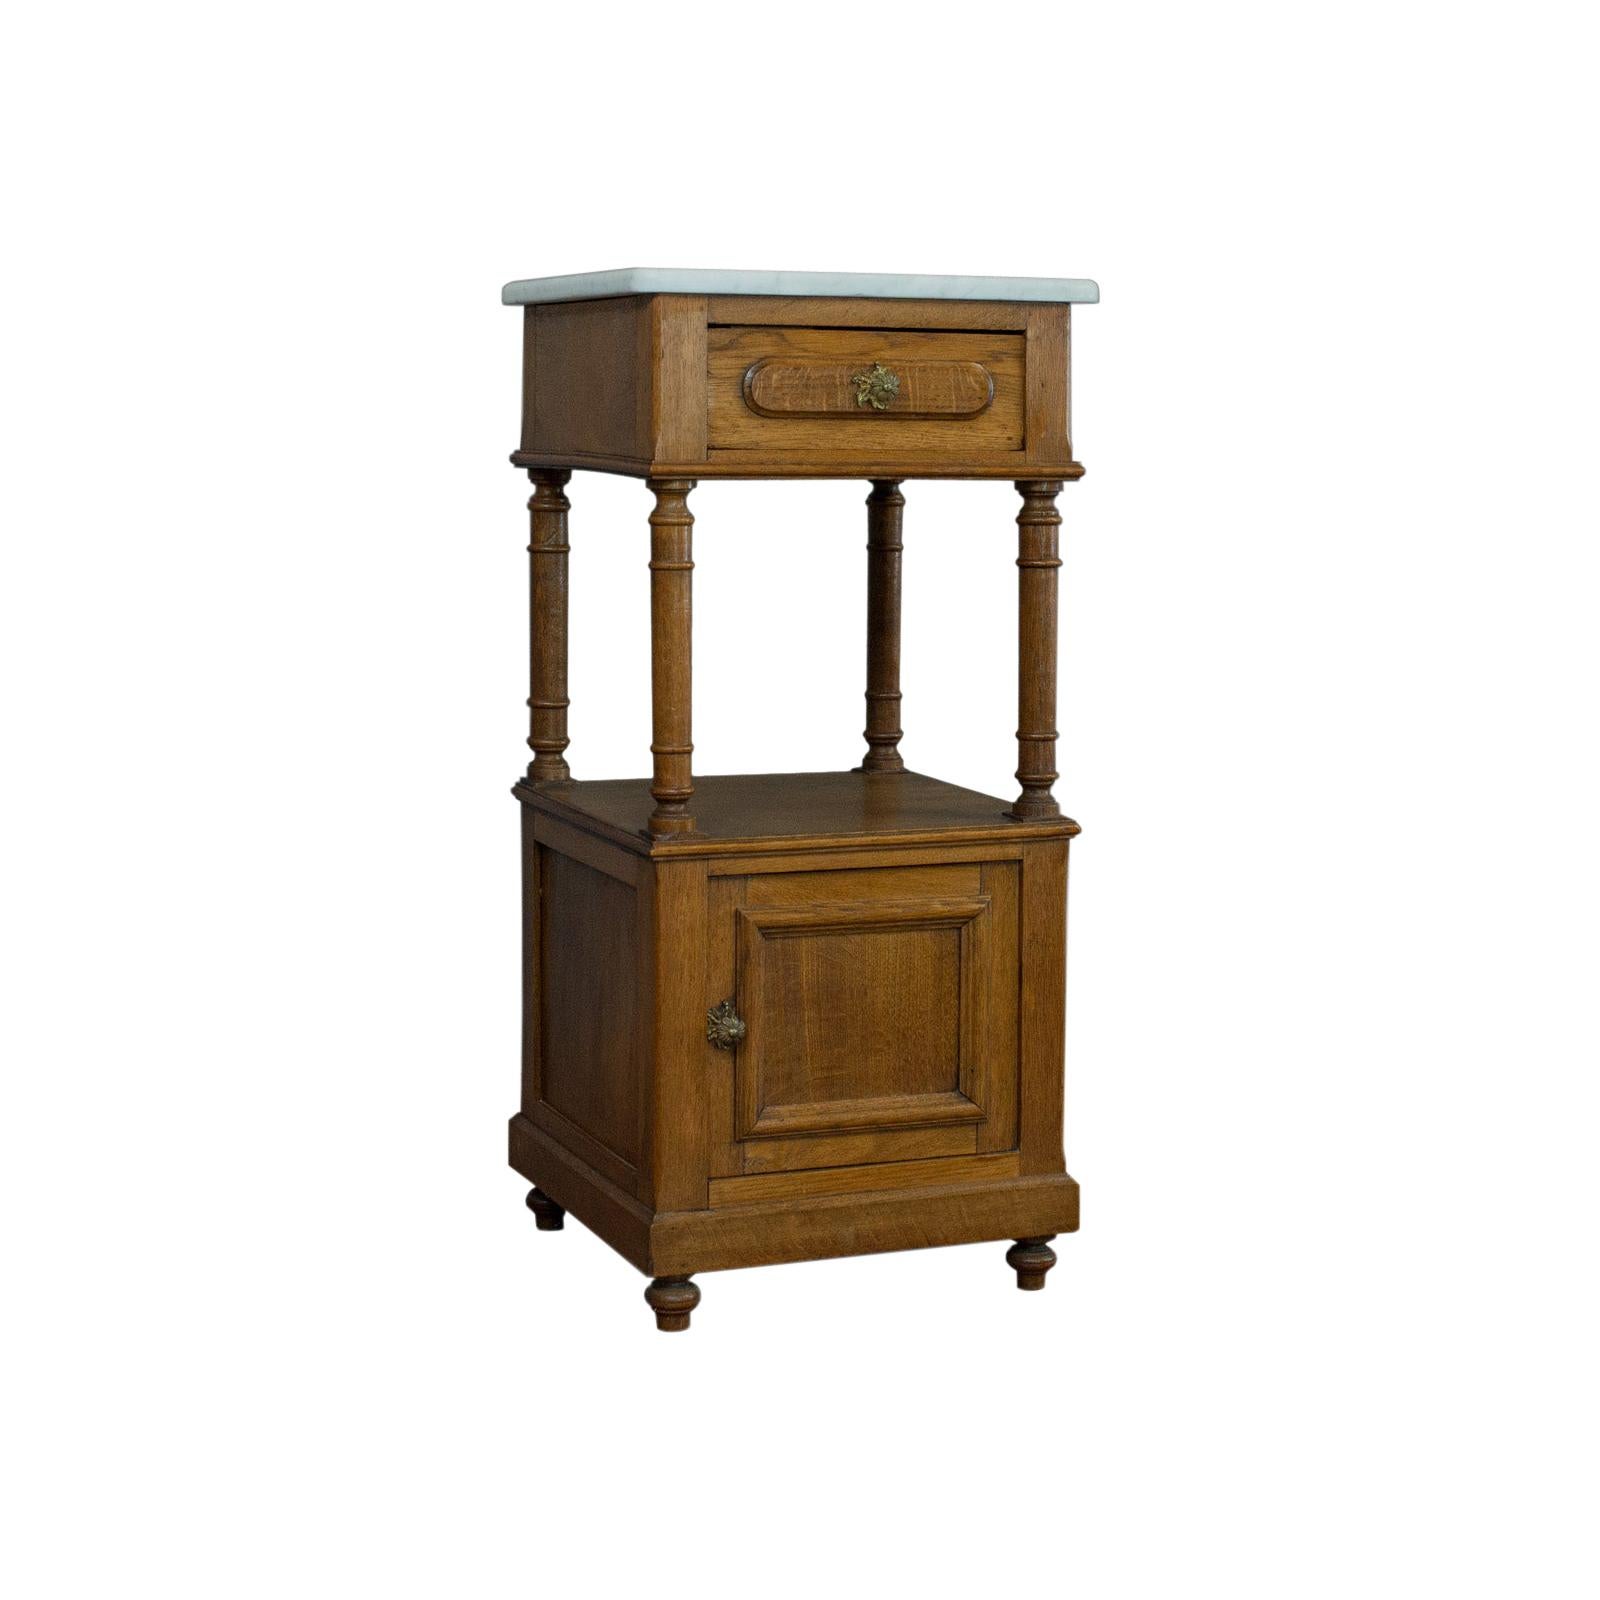 Antique Bedside Cabinet, French, Oak, Marble, Lamp, Nightstand, circa 1930